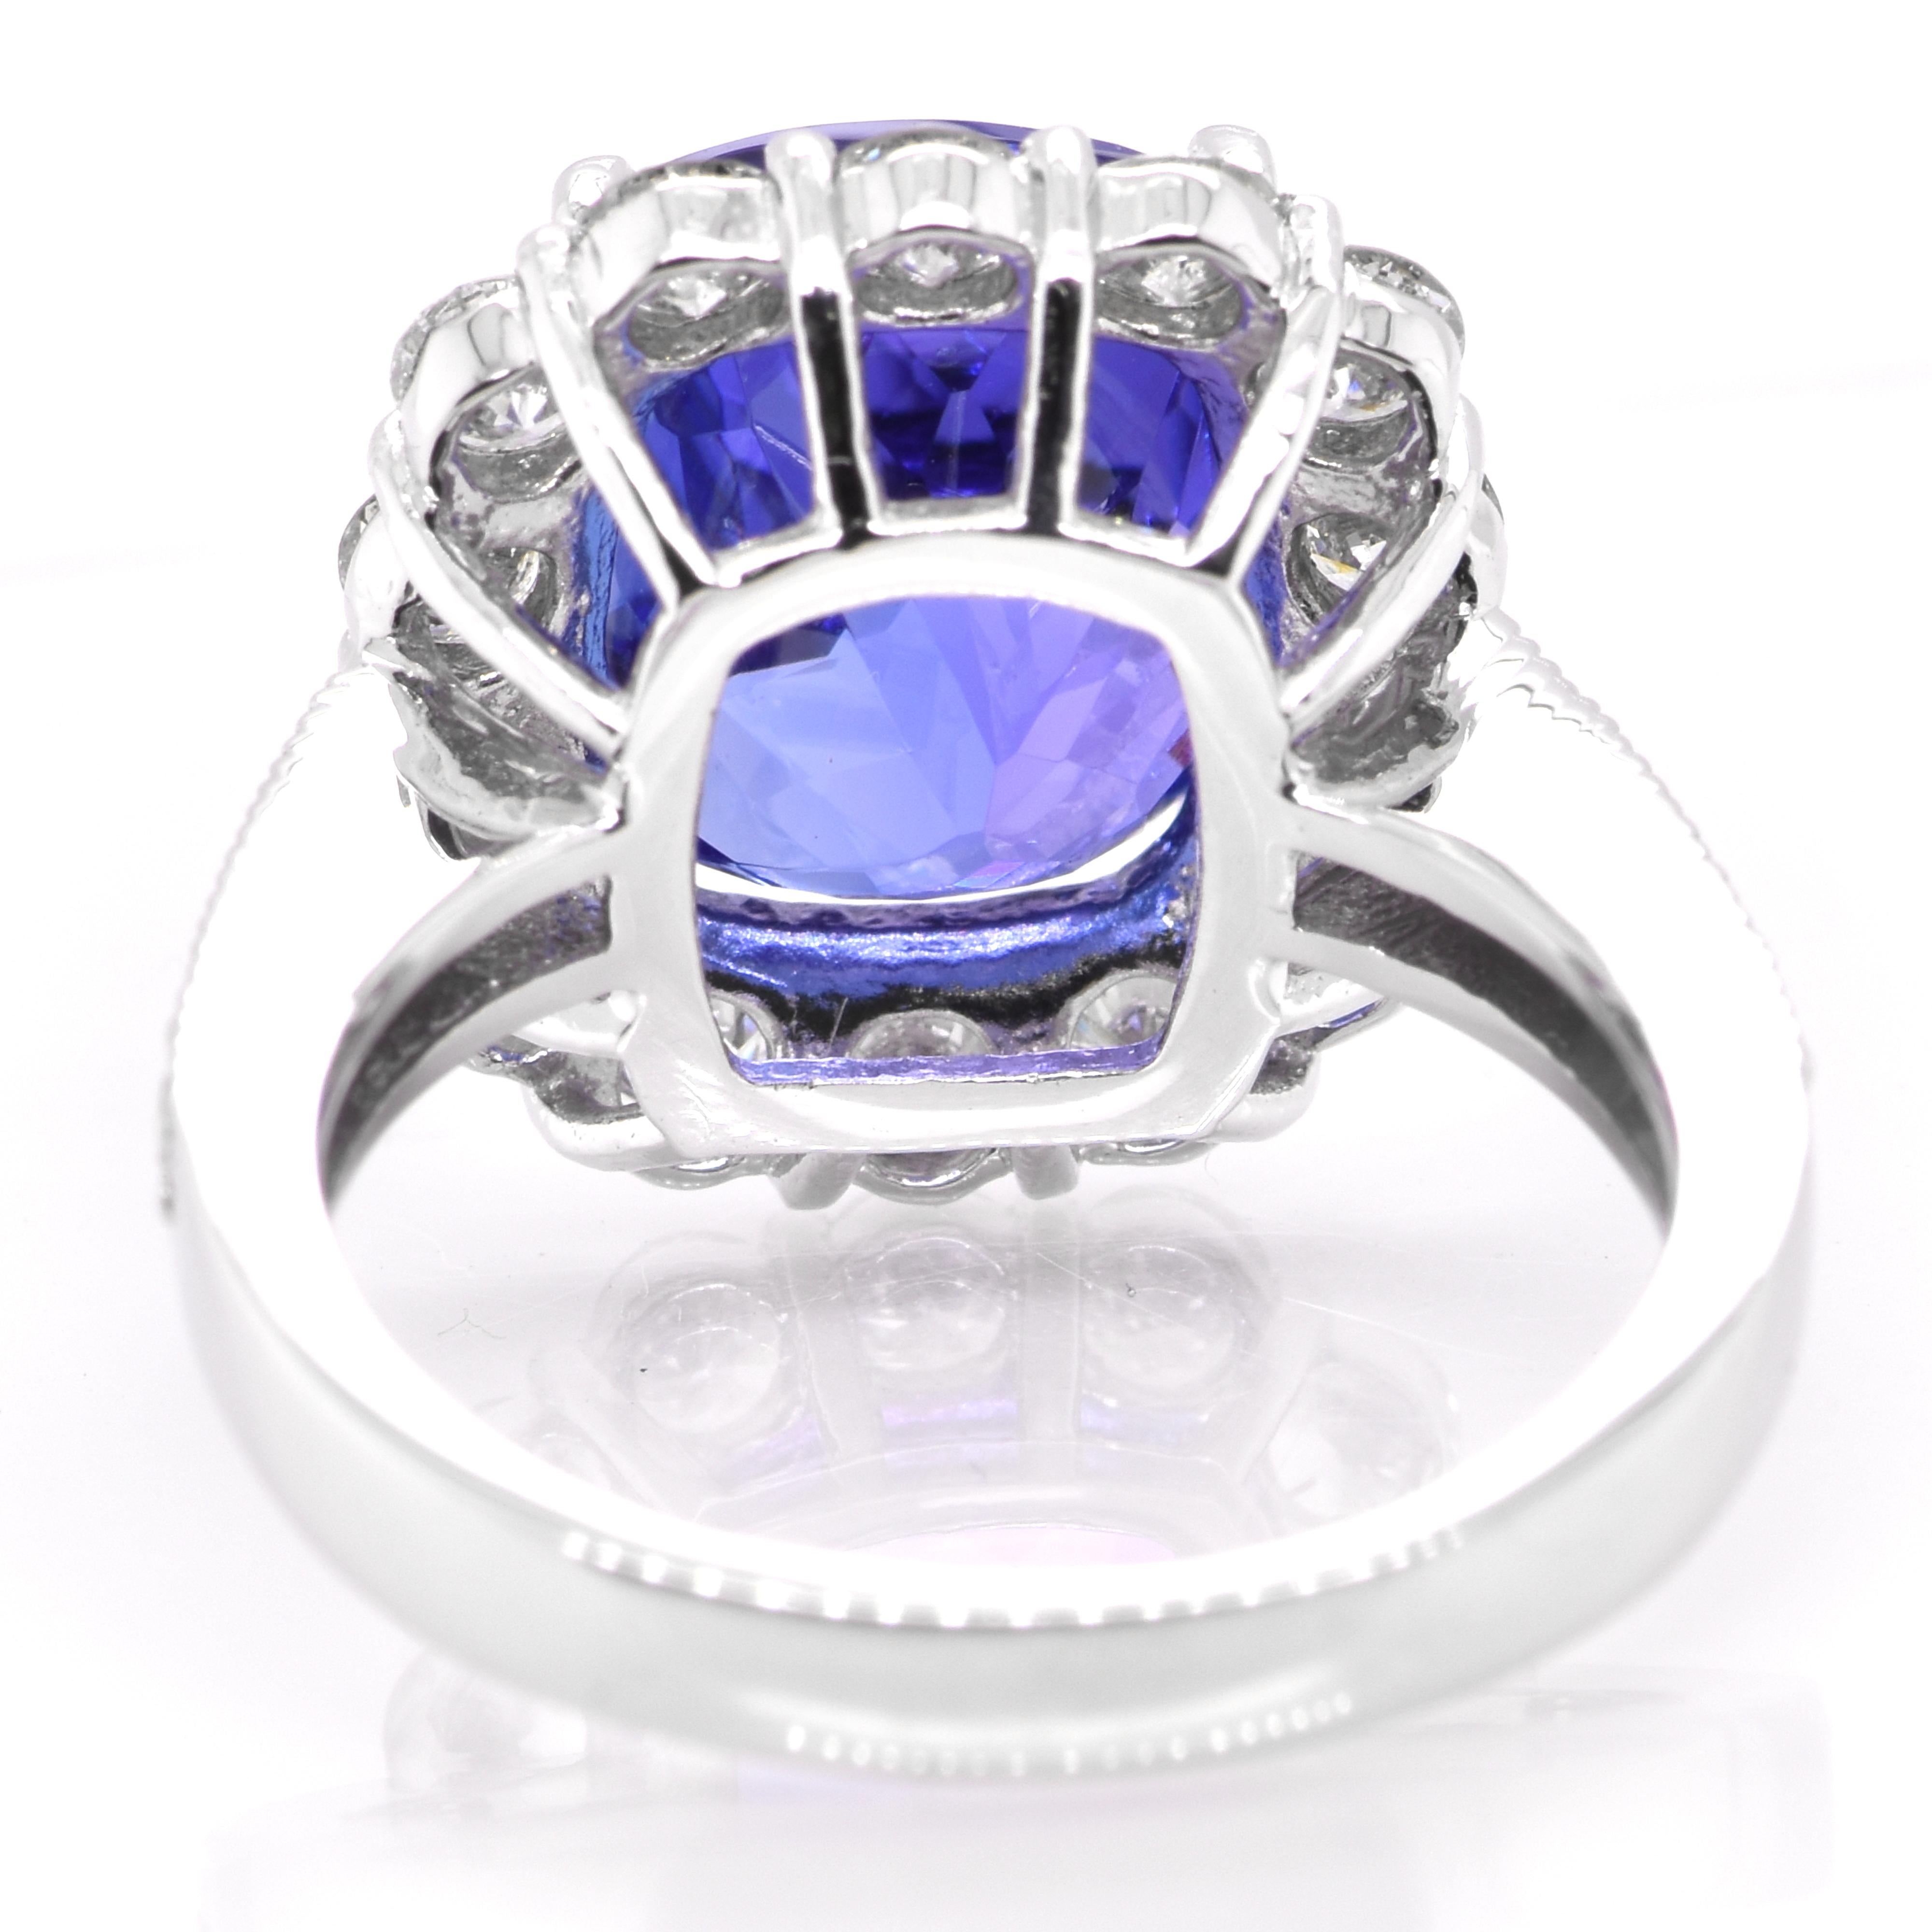 Women's 6.94 Carat Natural Cushion AAA+ Tanzanite and Diamond Ring Set in Platinum For Sale